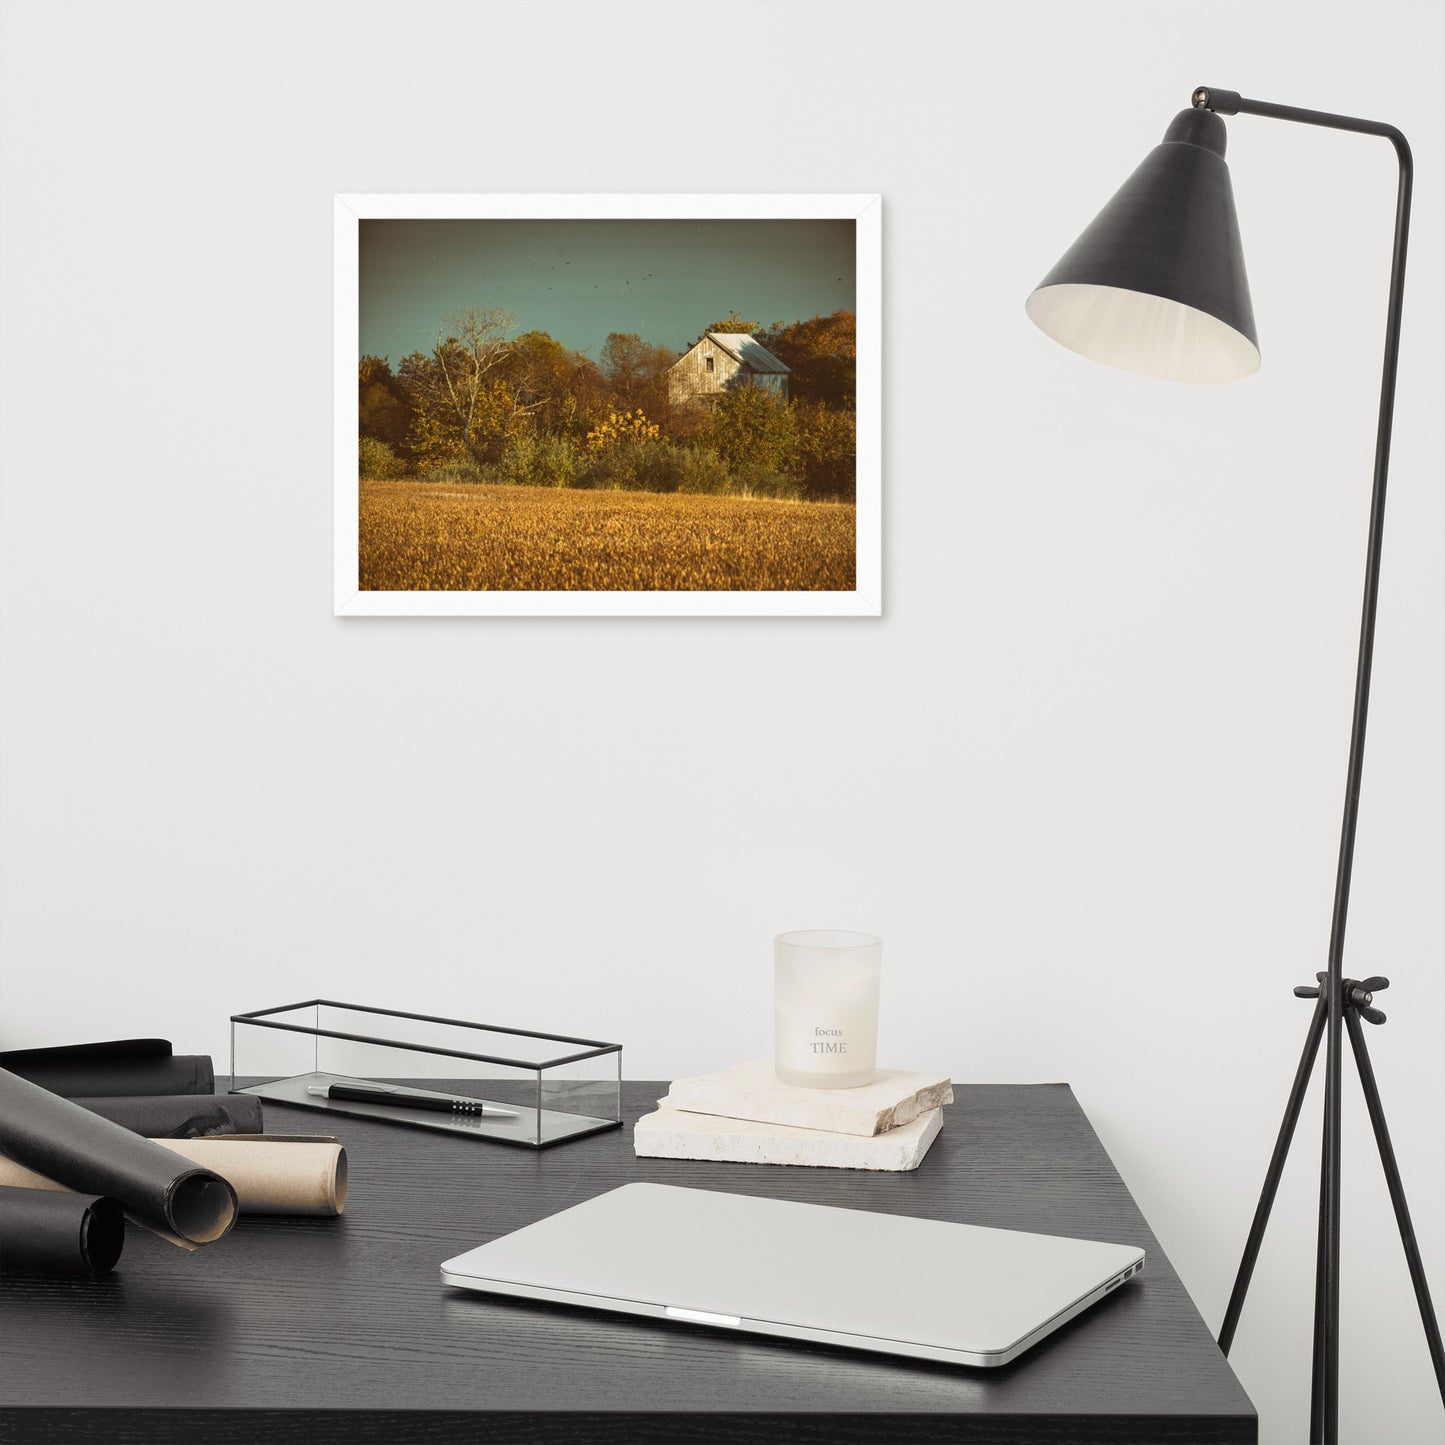 Wall Art Rustic: Abandoned Barn In The Trees Abstract Colorized Rustic / Rural Landscape Photo Paper Prints - Artwork - Wall Decor